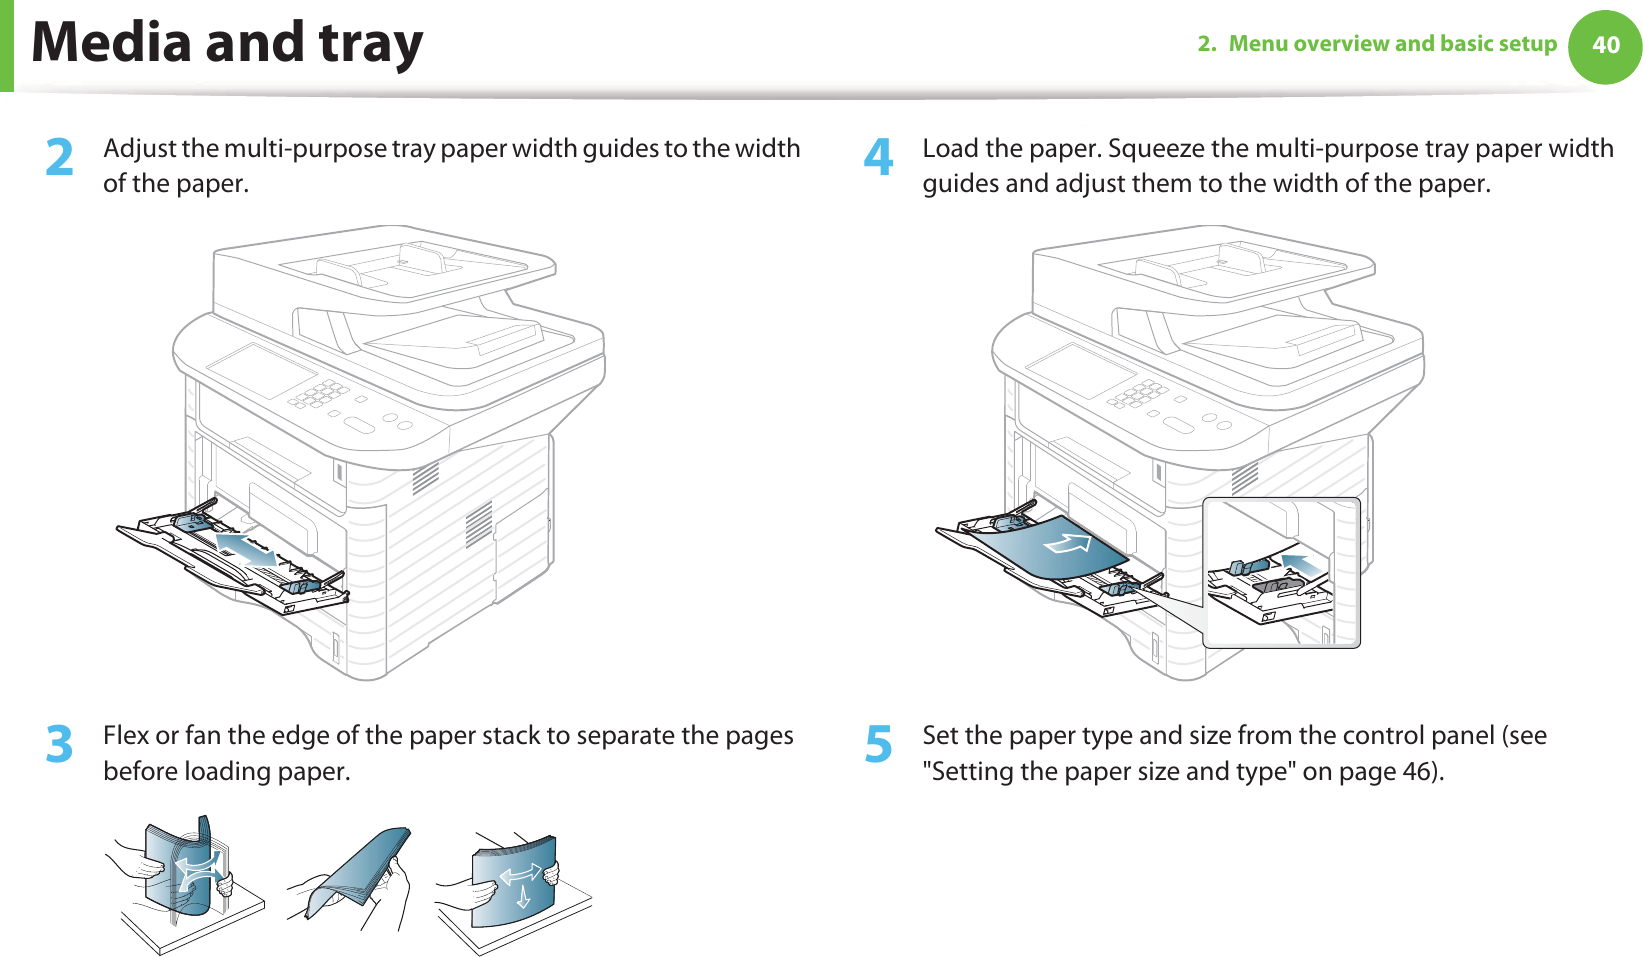 Media and tray 402. Menu overview and basic setup2  Adjust the multi-purpose tray paper width guides to the width of the paper. 3  Flex or fan the edge of the paper stack to separate the pages before loading paper.4  Load the paper. Squeeze the multi-purpose tray paper width guides and adjust them to the width of the paper.5  Set the paper type and size from the control panel (see &quot;Setting the paper size and type&quot; on page 46).